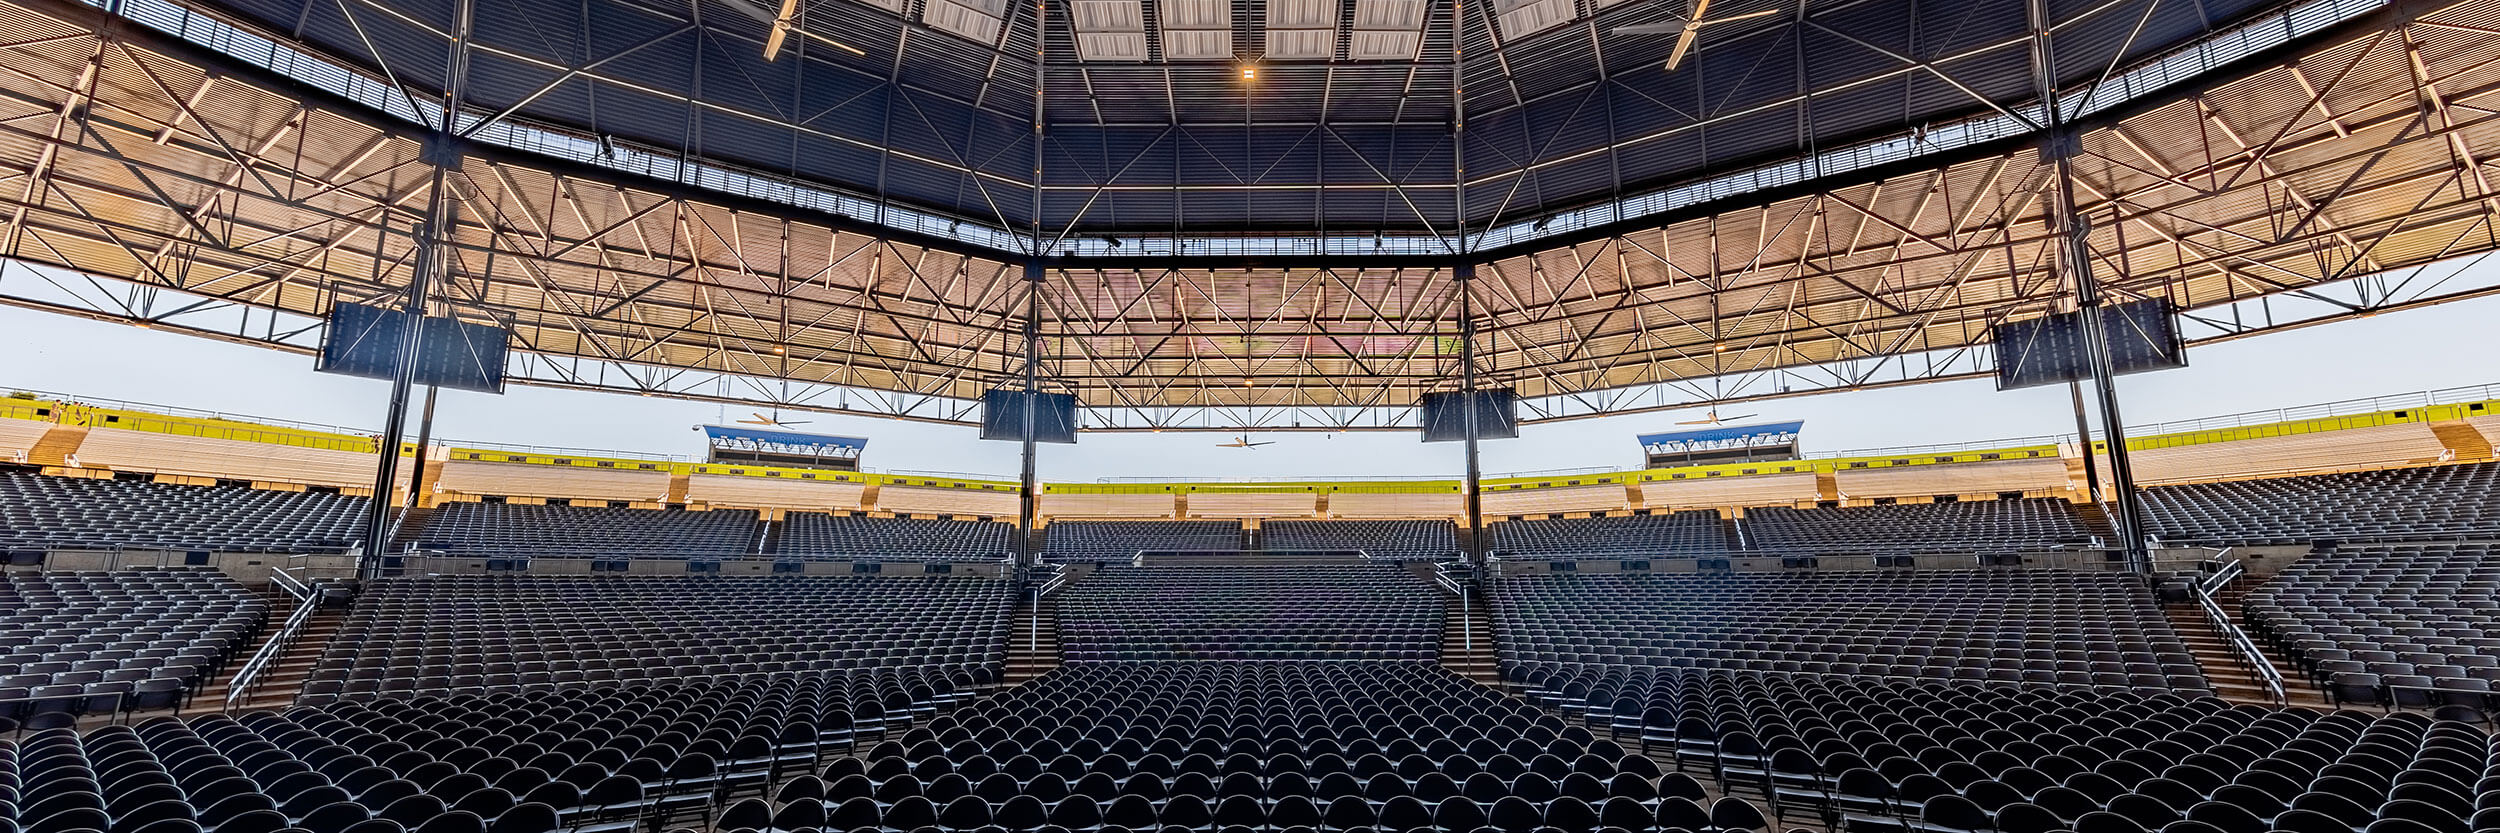 Interior of the American Family Insurance Amphitheater